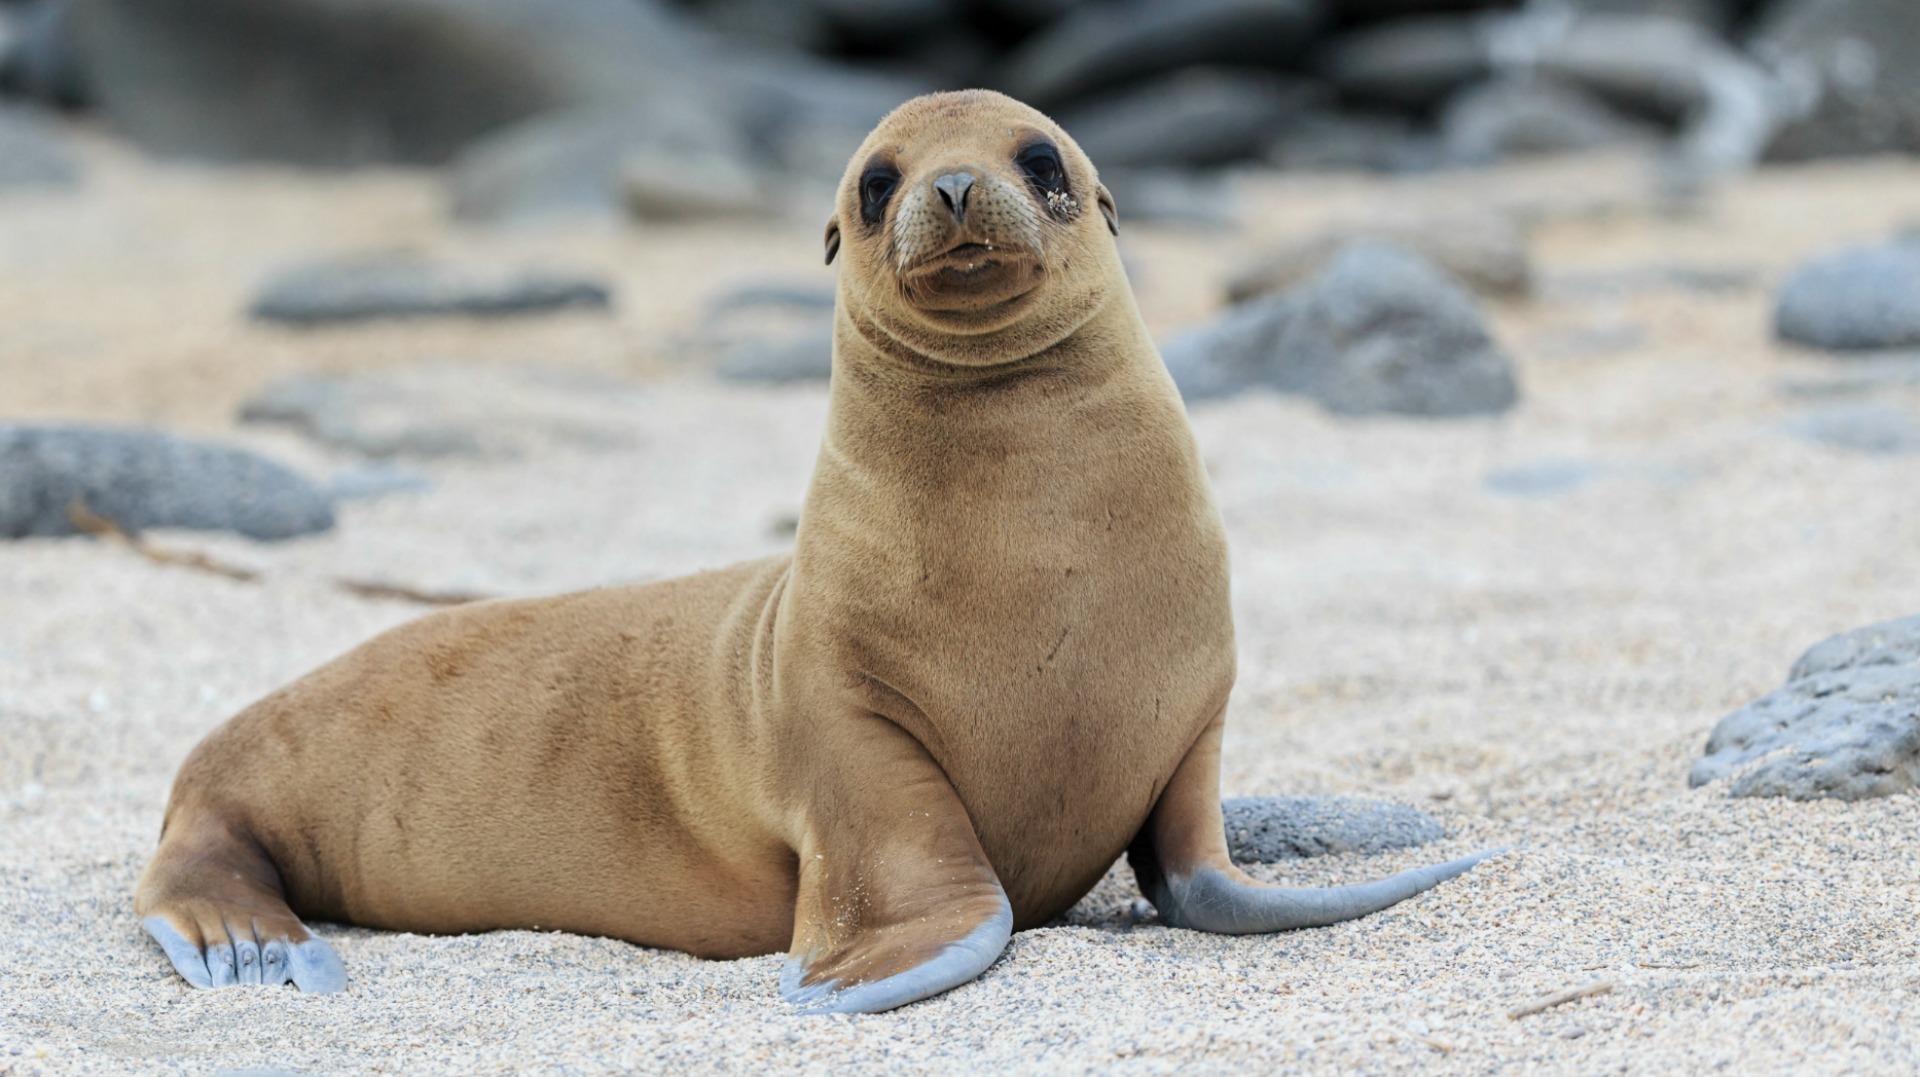 California's sea lions are in serious trouble (VIDEO)